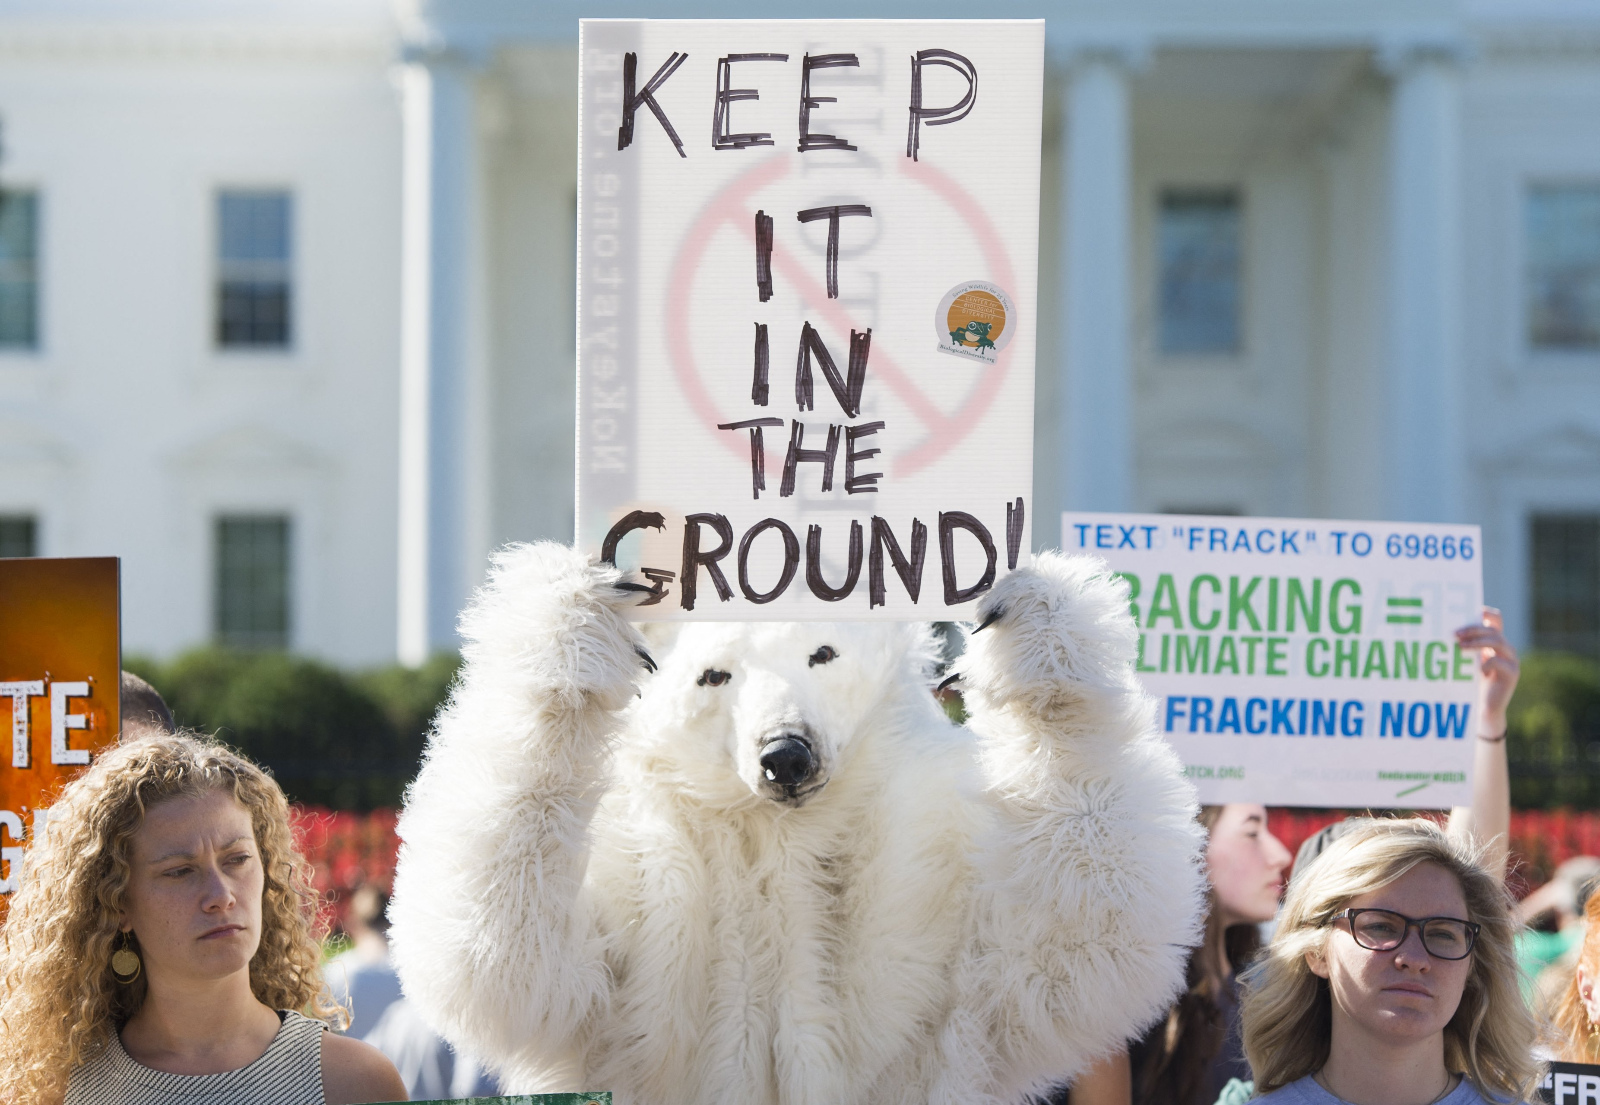 Photo of a person dressed up as a polar bear holding a "keep it in the ground" sign